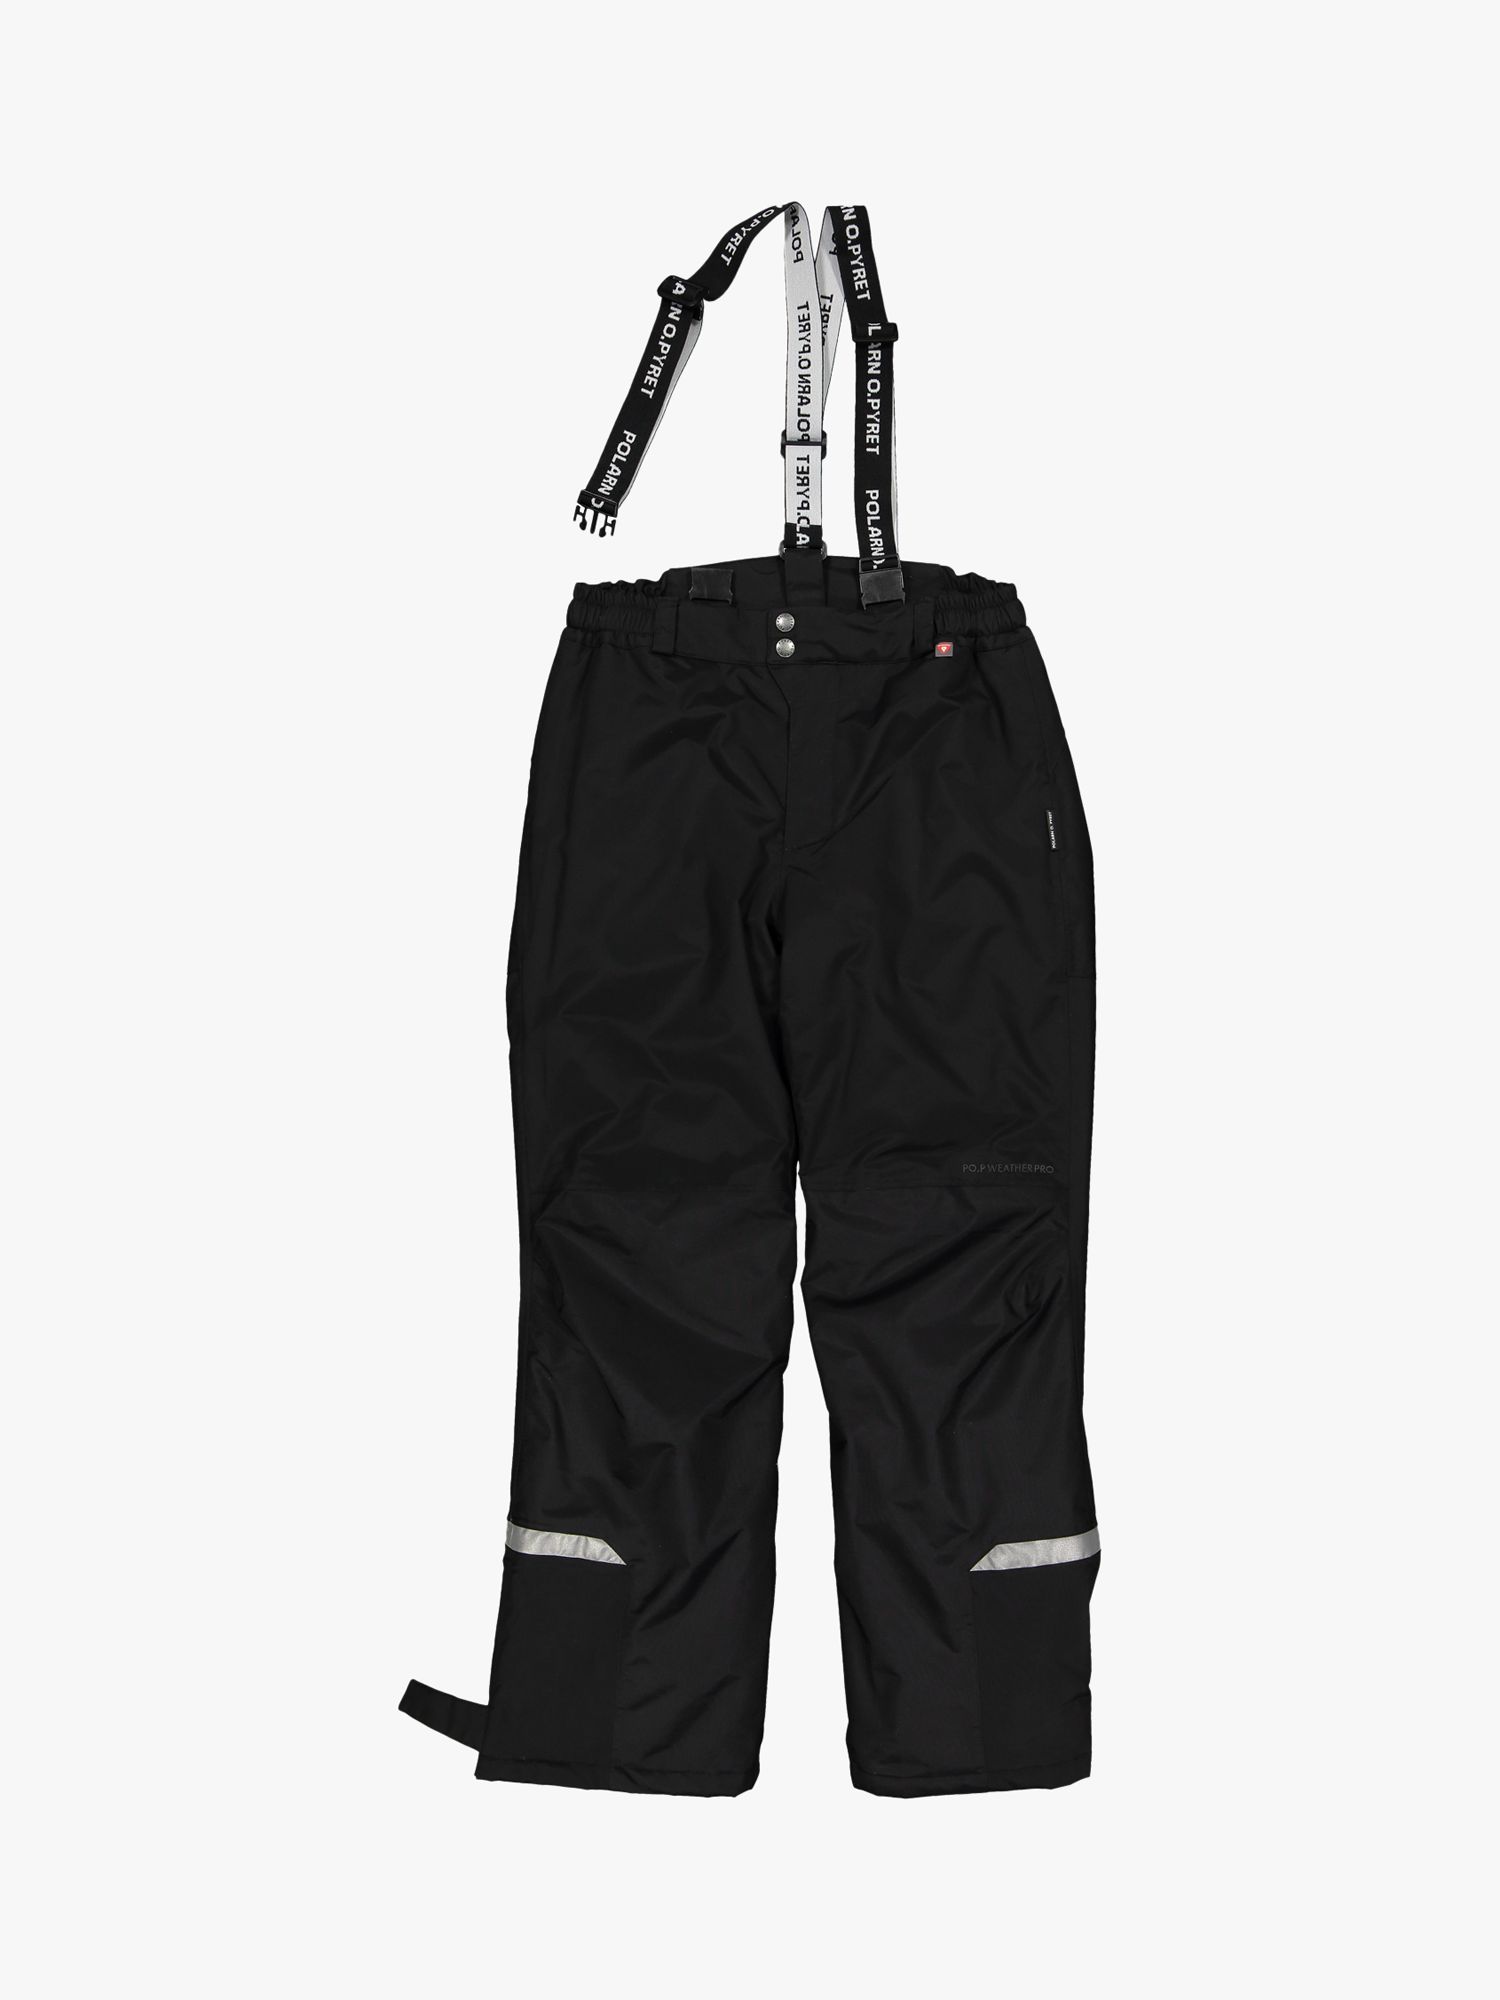 Buy Polarn O. Pyret Kids' Padded Wind & Waterproof Shell Trousers, Black Online at johnlewis.com